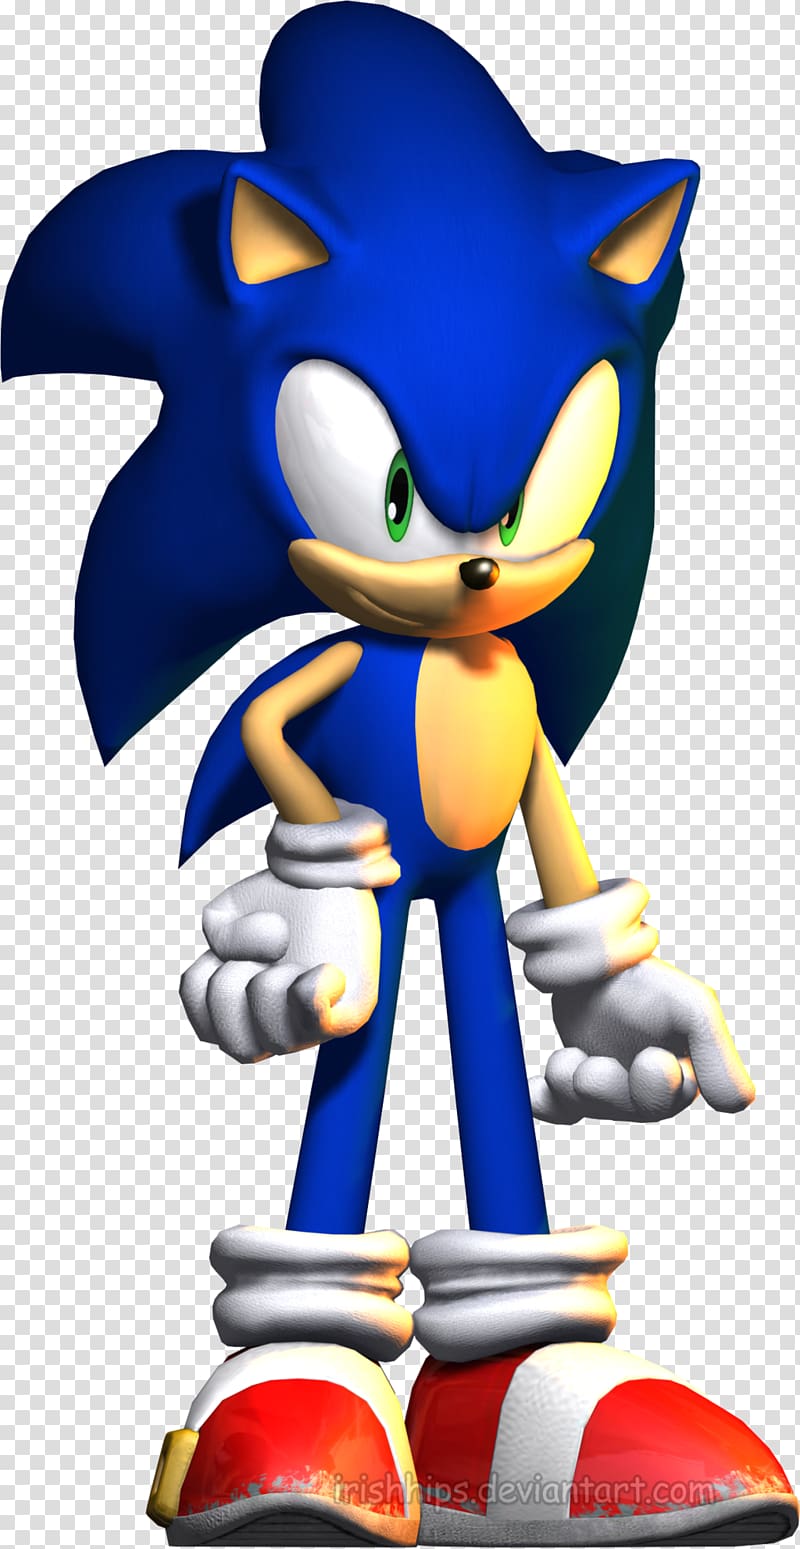 Sonic the Hedgehog 2 Sonic Generations Amy Rose Shadow the Hedgehog, hedgehog transparent background PNG clipart